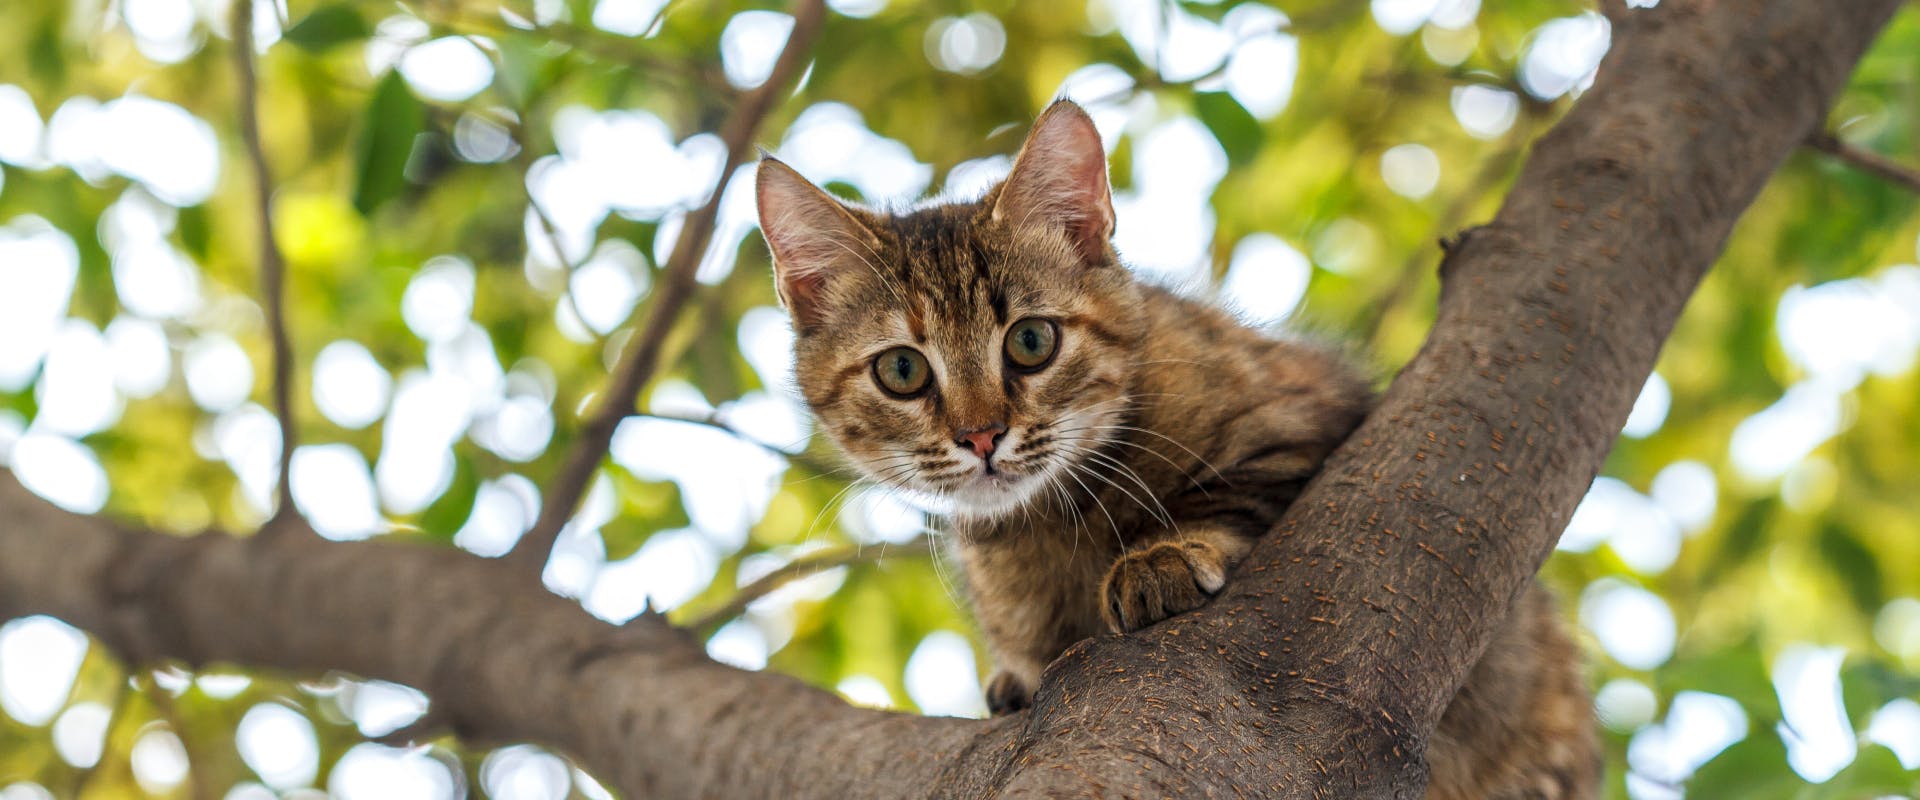 a young tabby cat up in a tree looking down at the camera